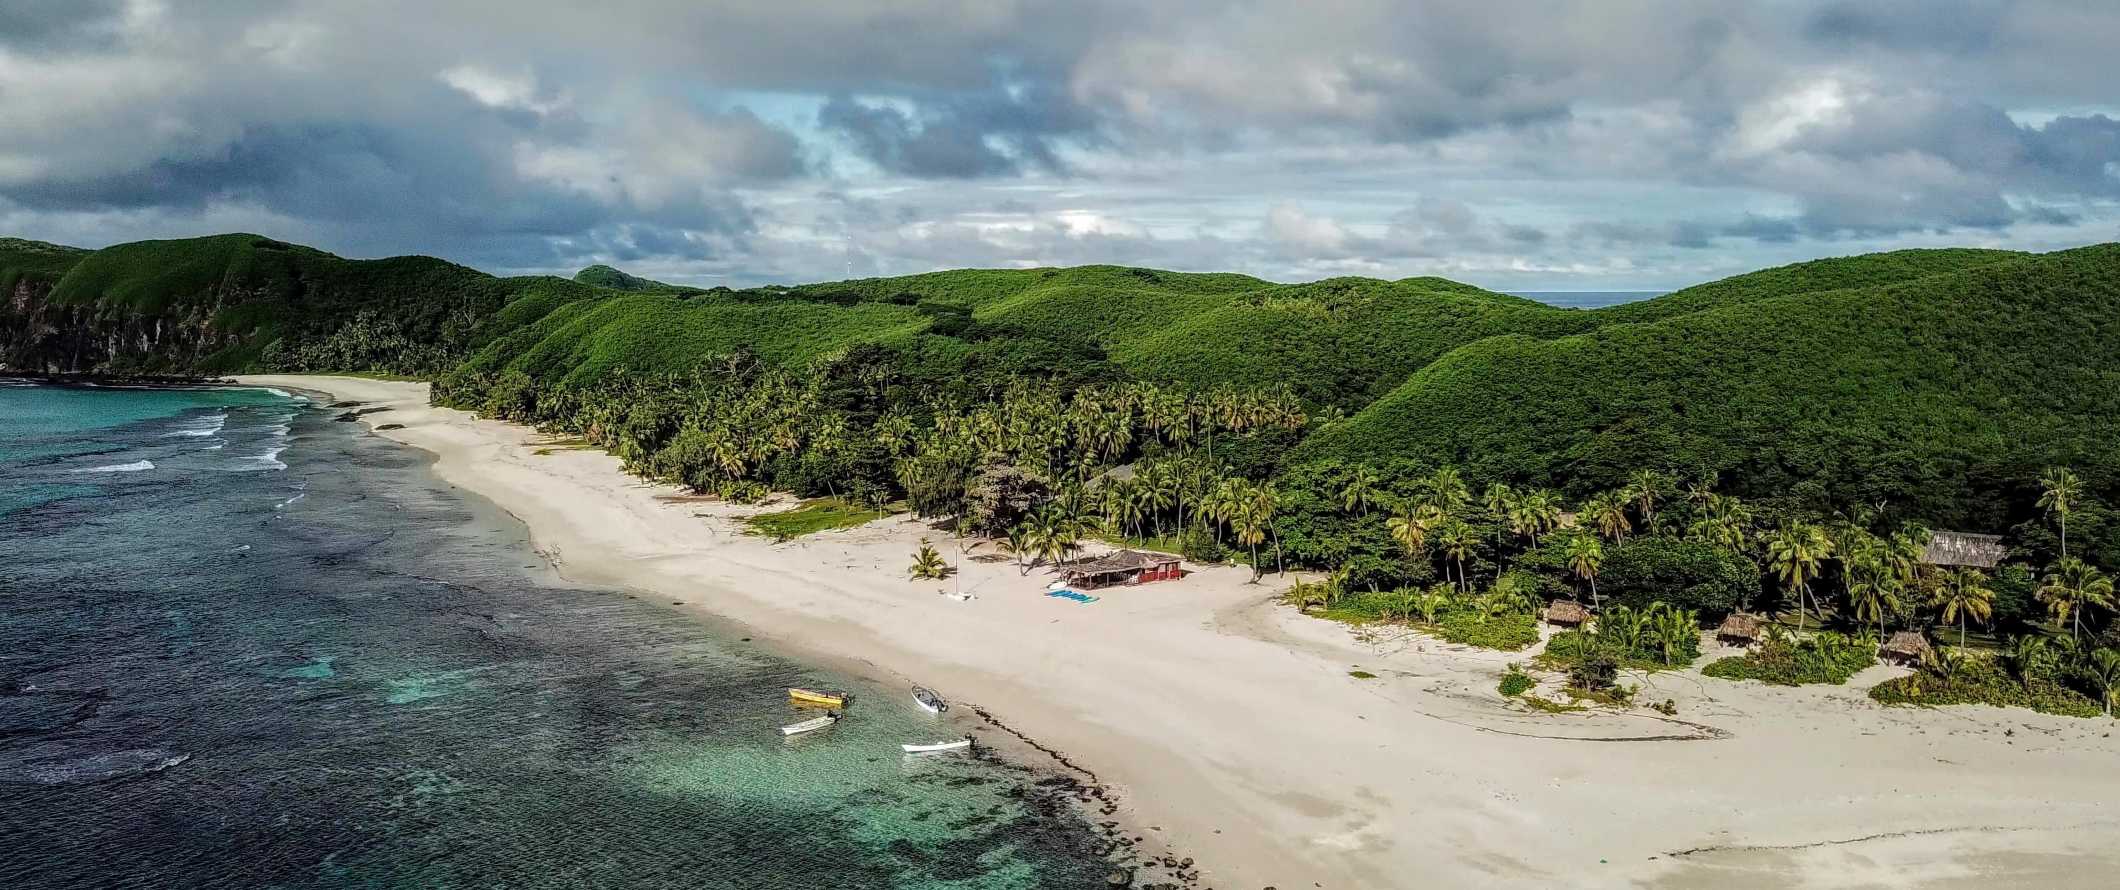 Aerial view of the beach and lush green jungles along the coast of the Yasawa Islands in Fiji